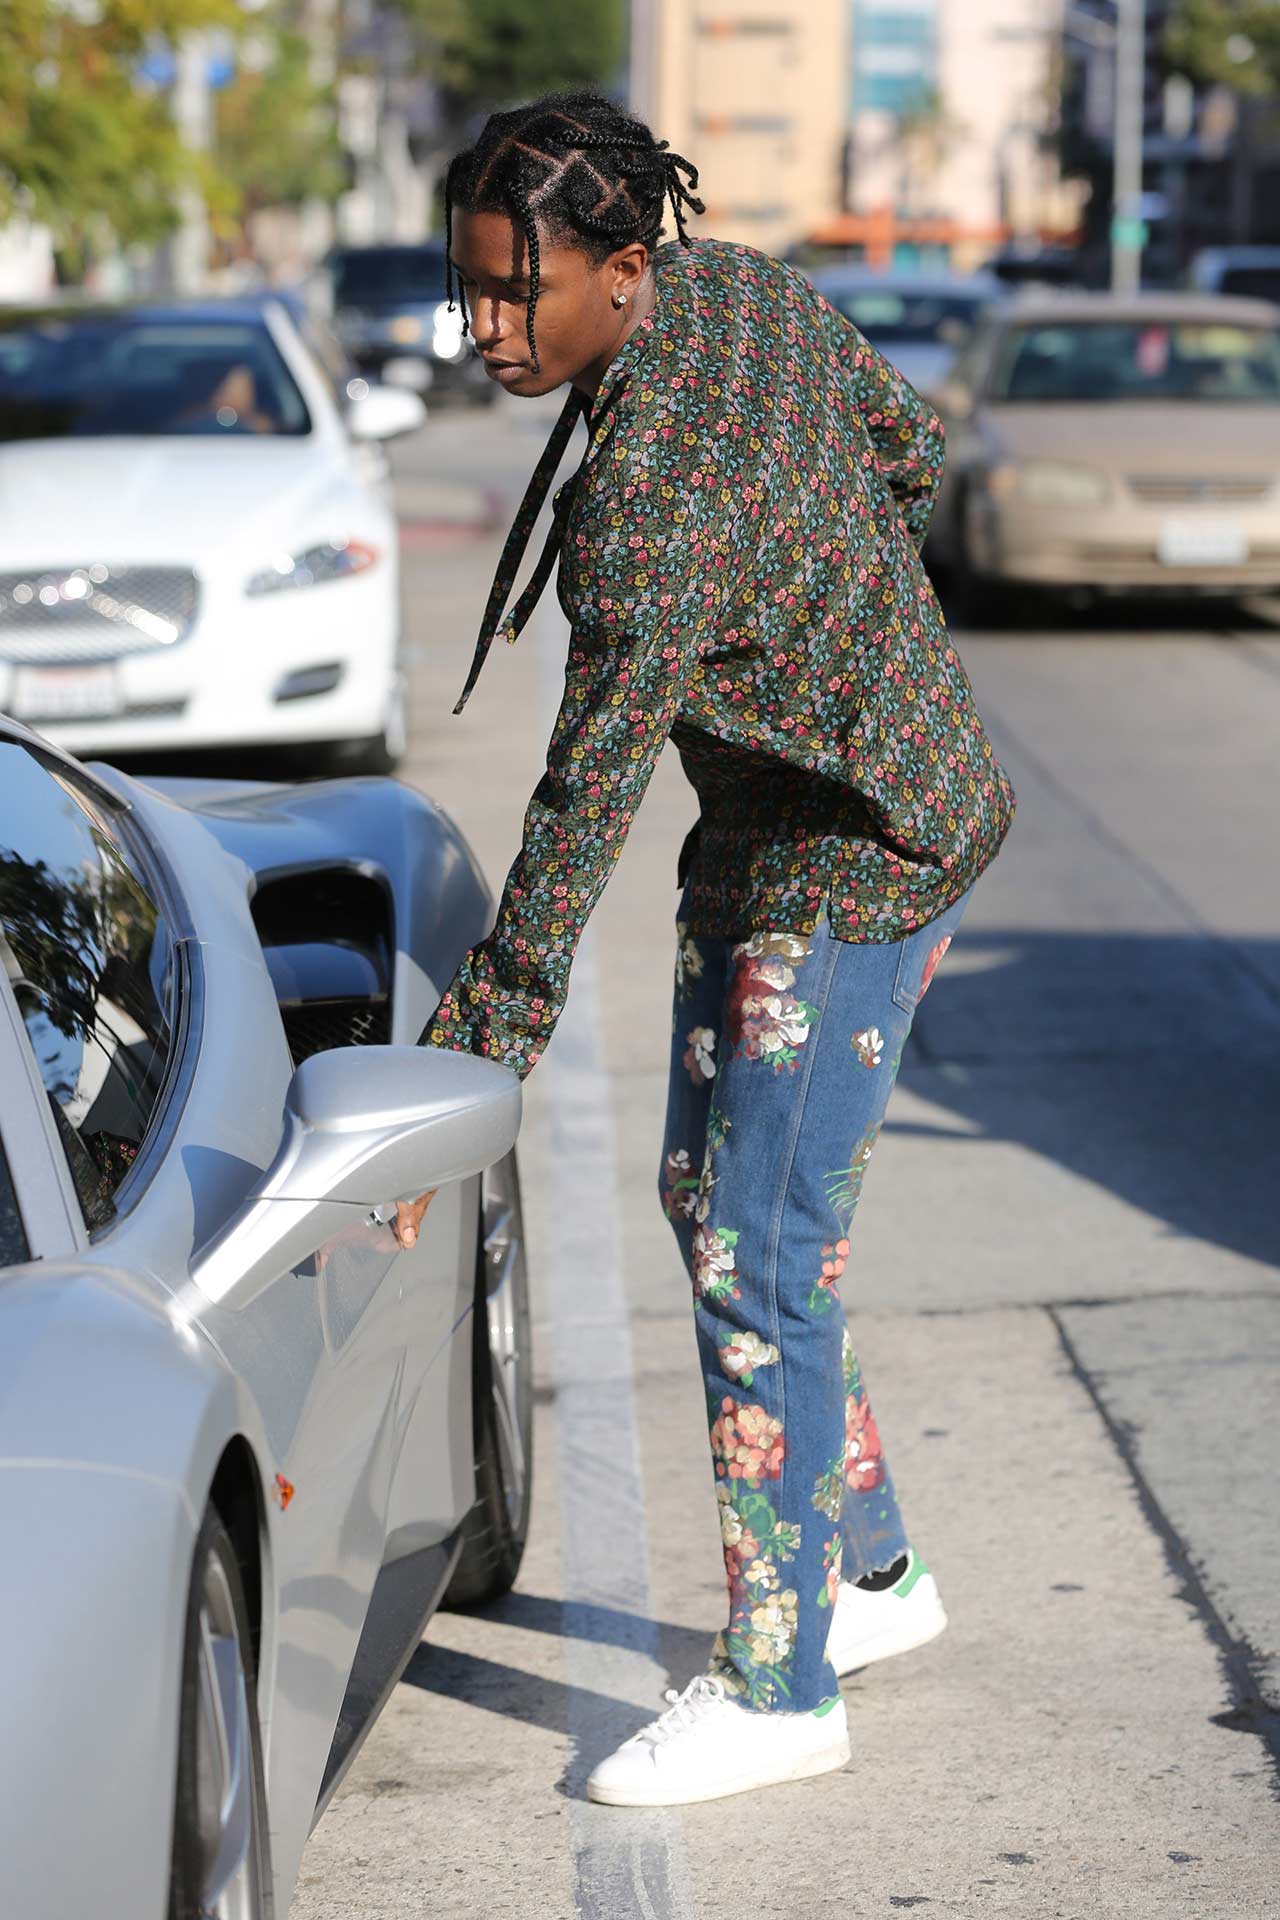 Spotted: A$AP Rocky In Gucci shirt, Jeans and Air Jordan shoes – PAUSE  Online